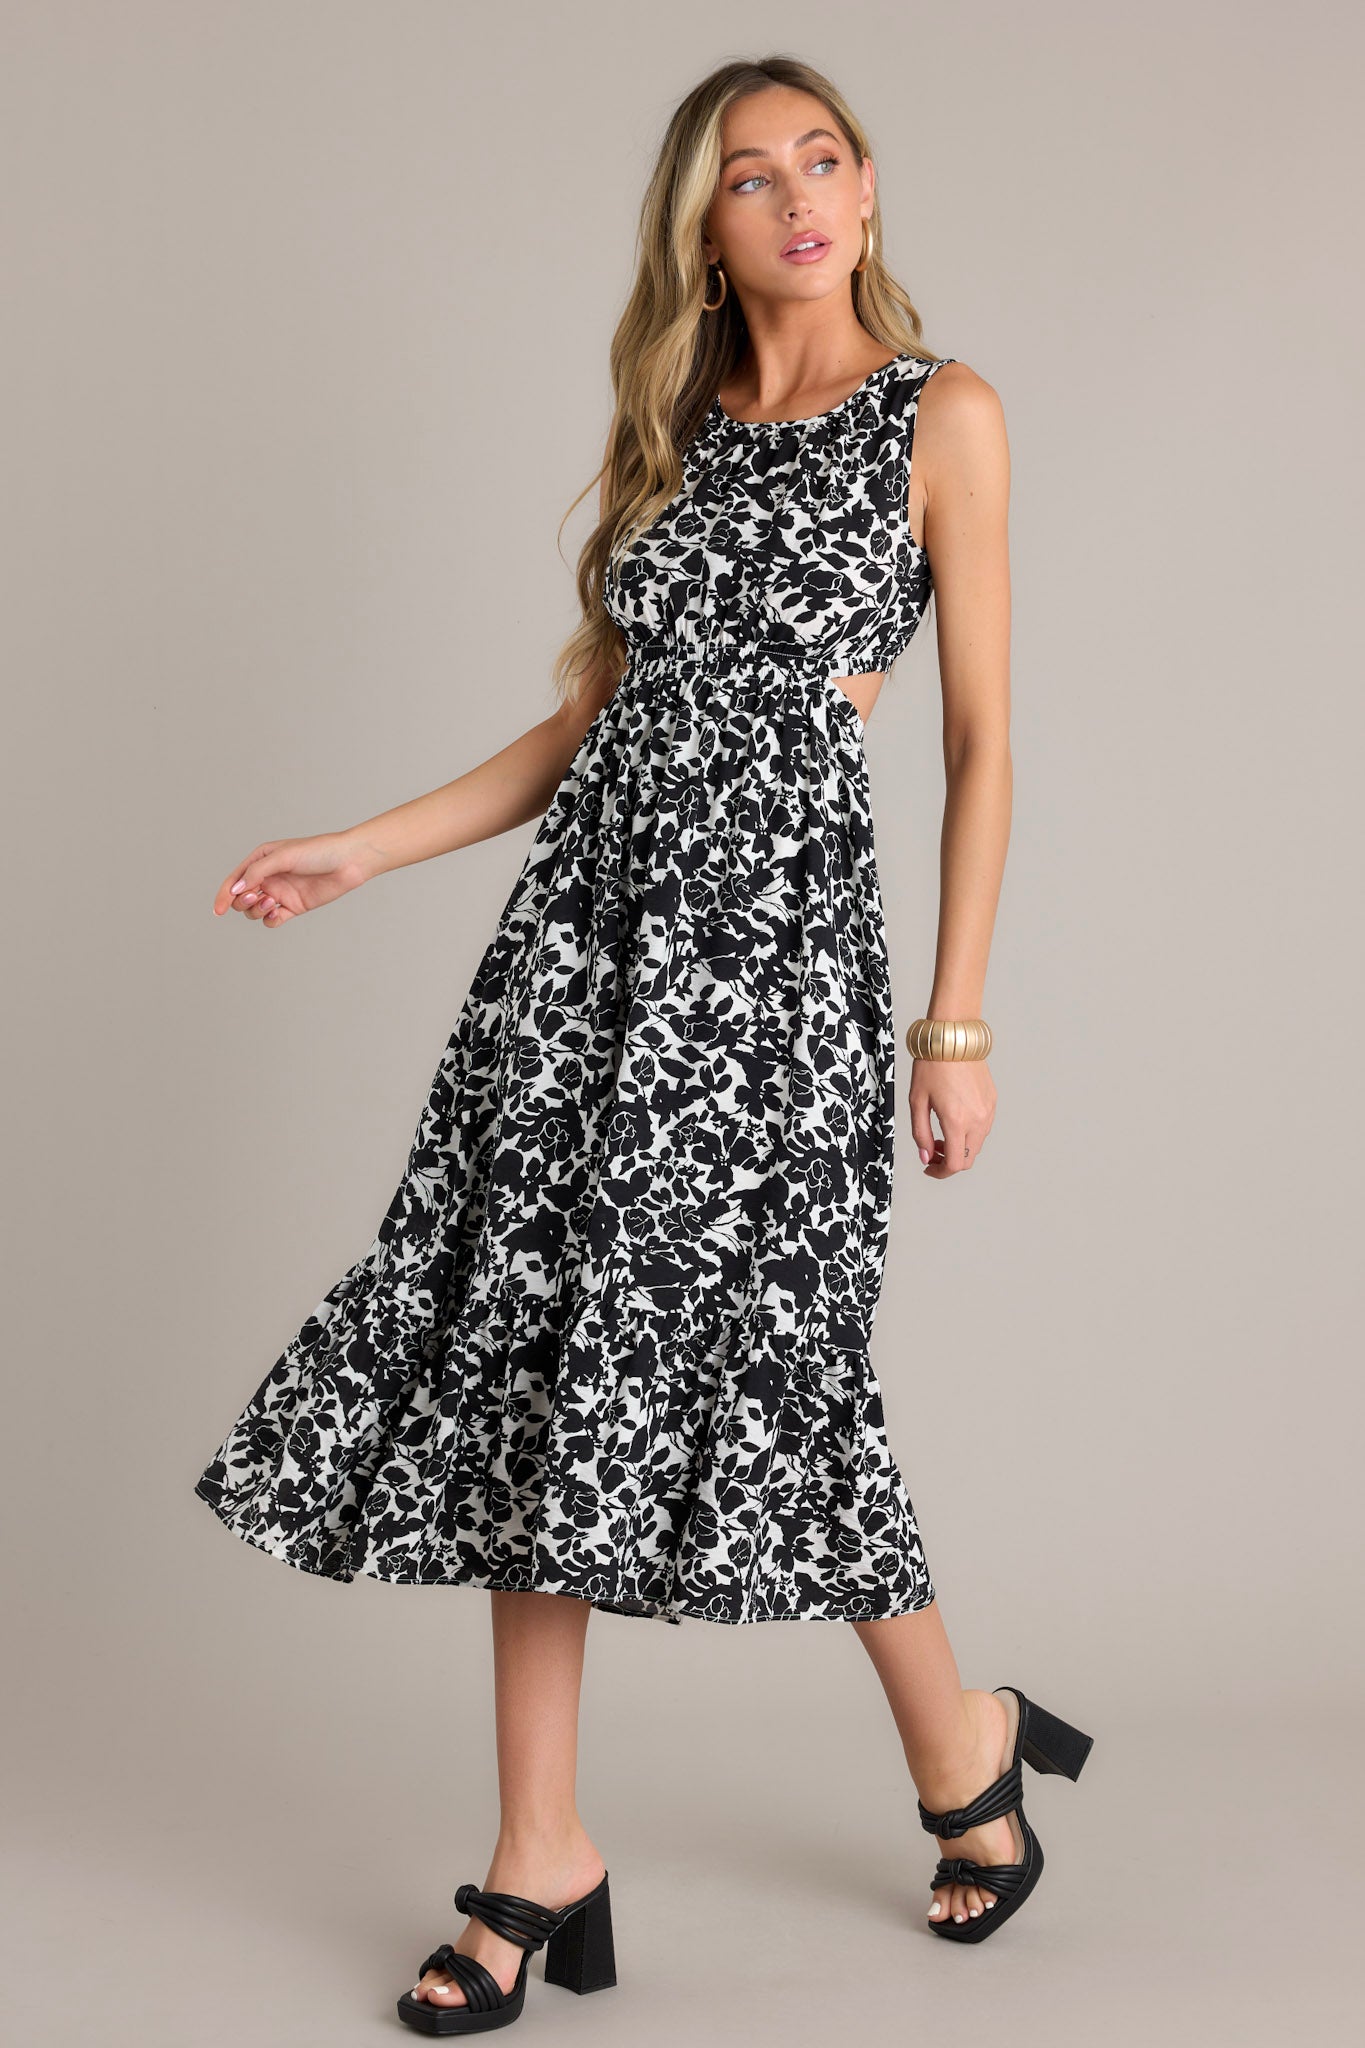 Action shot of a black midi dress displaying the flow and movement of the fabric, highlighting the round neckline, self-tie feature at the back of the neck, waist cutouts, an elastic waistband, an open lower back, a single tier, and a flowing silhouette.